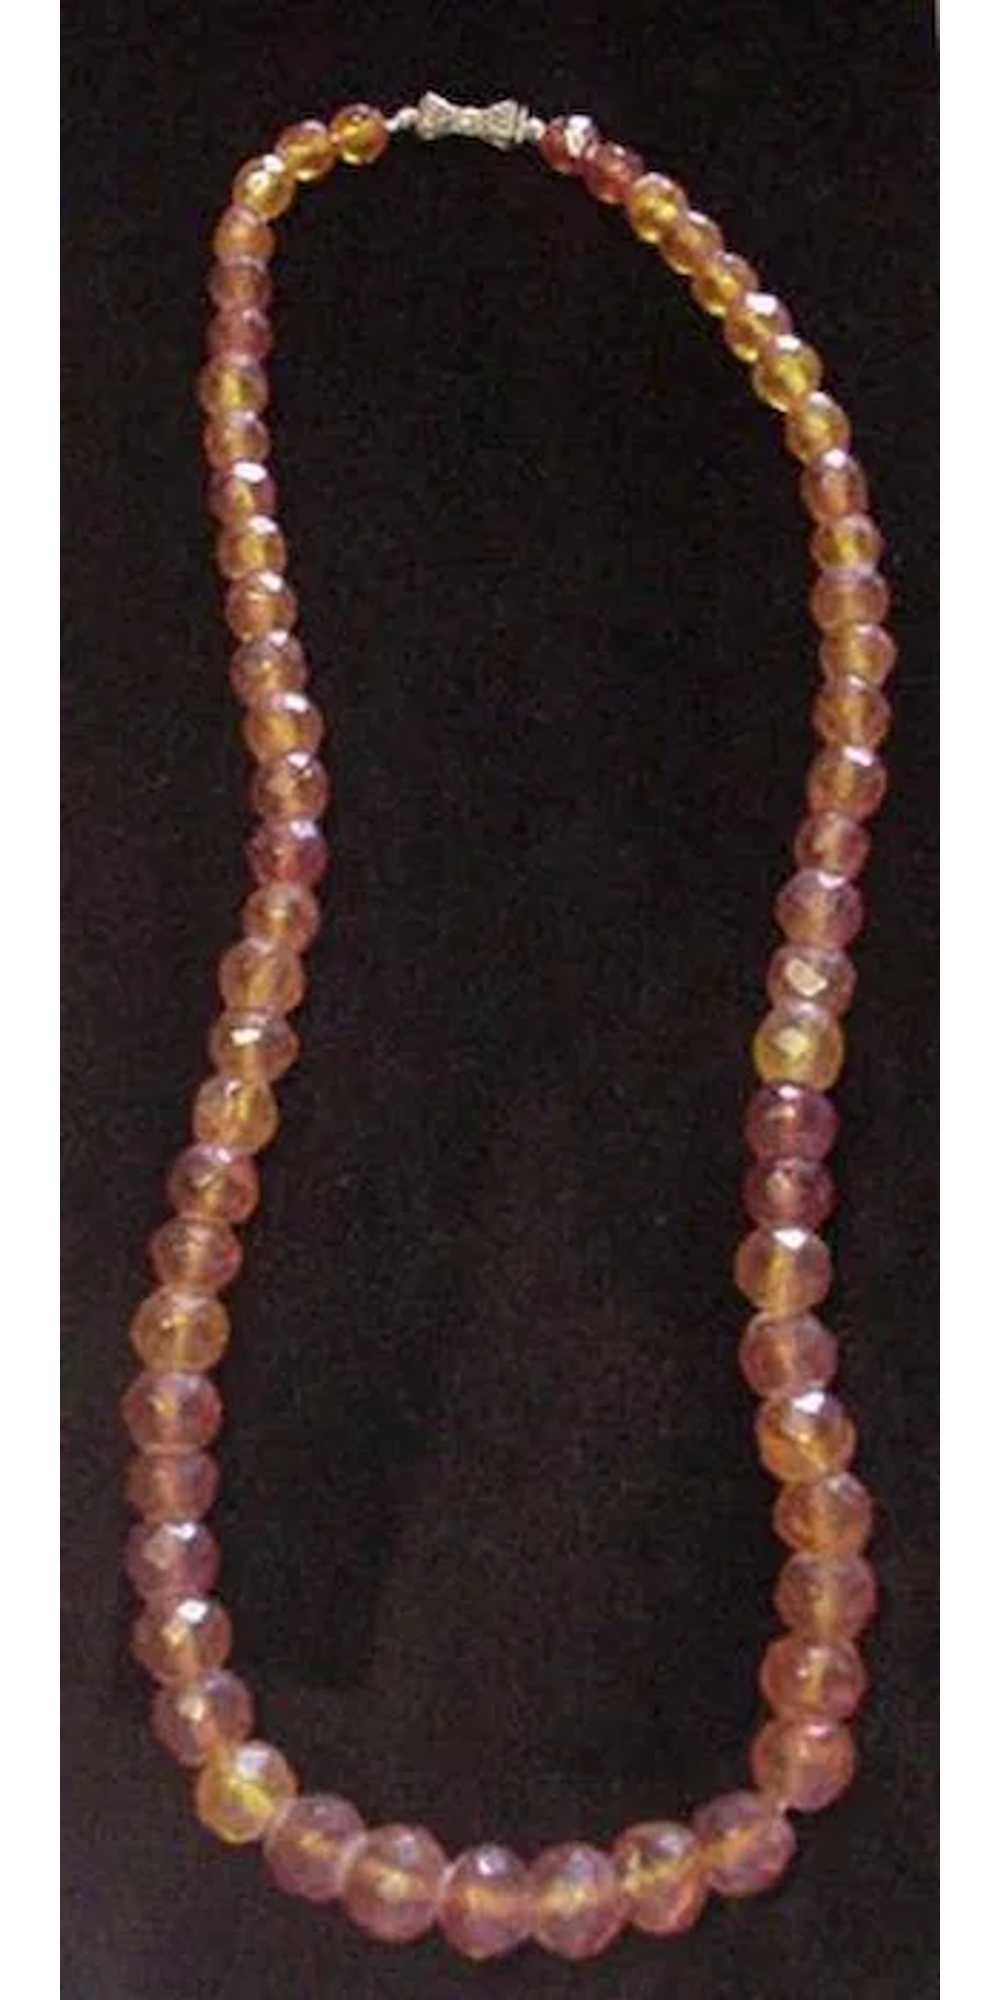 Vintage Faceted Genuine Amber Bead Necklace - image 1